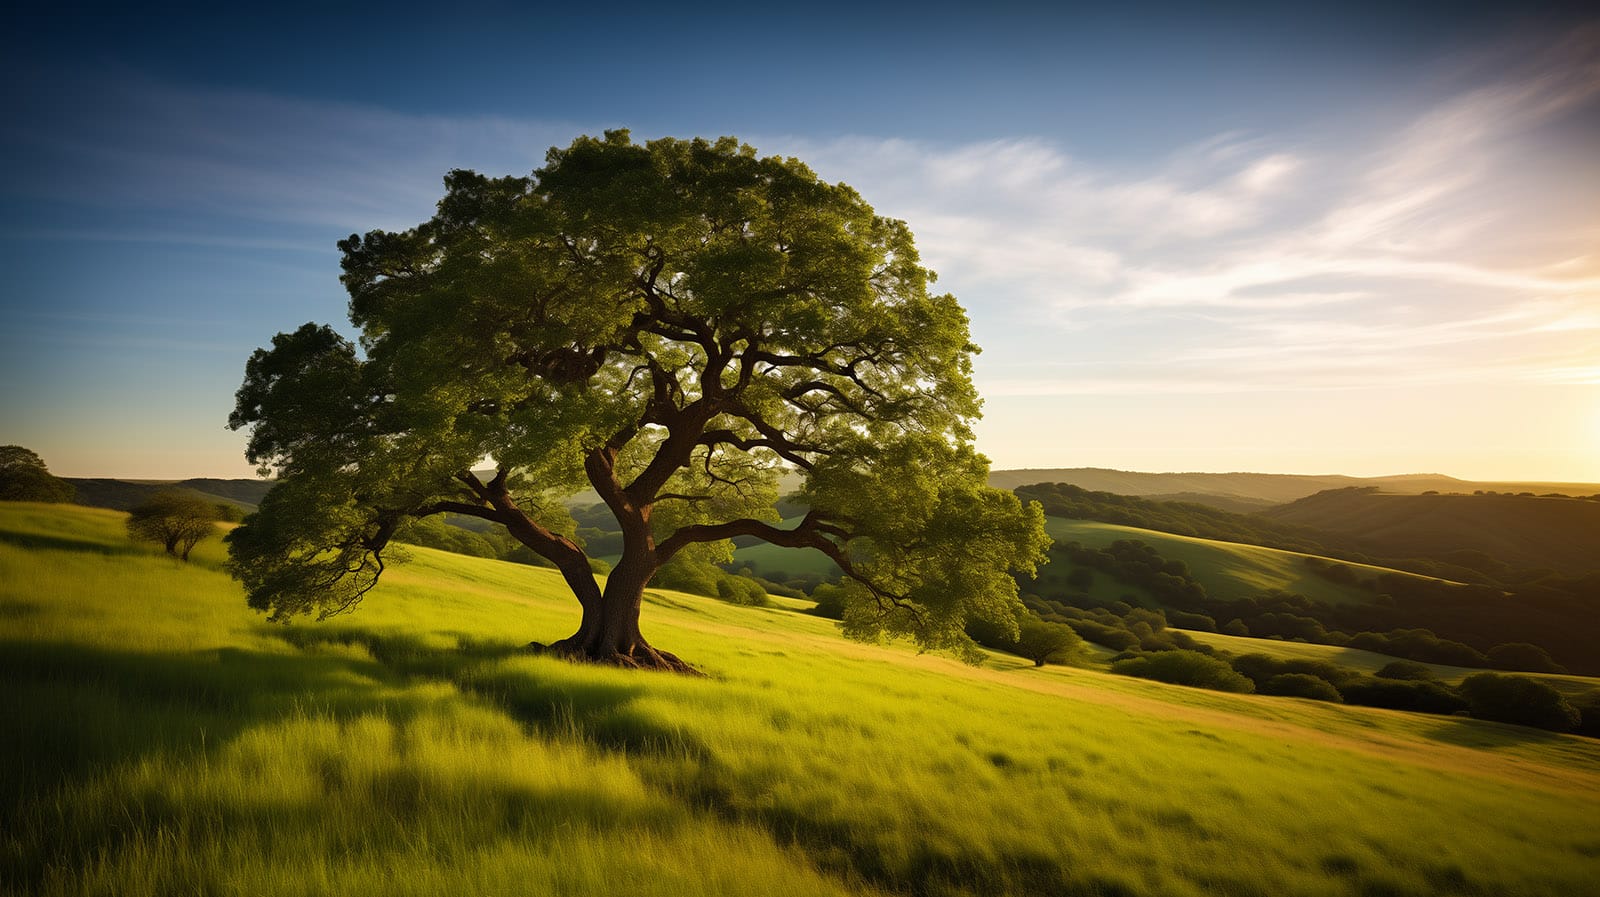 Resilient and confident Oaktree sat on the side of a hill confident meditation